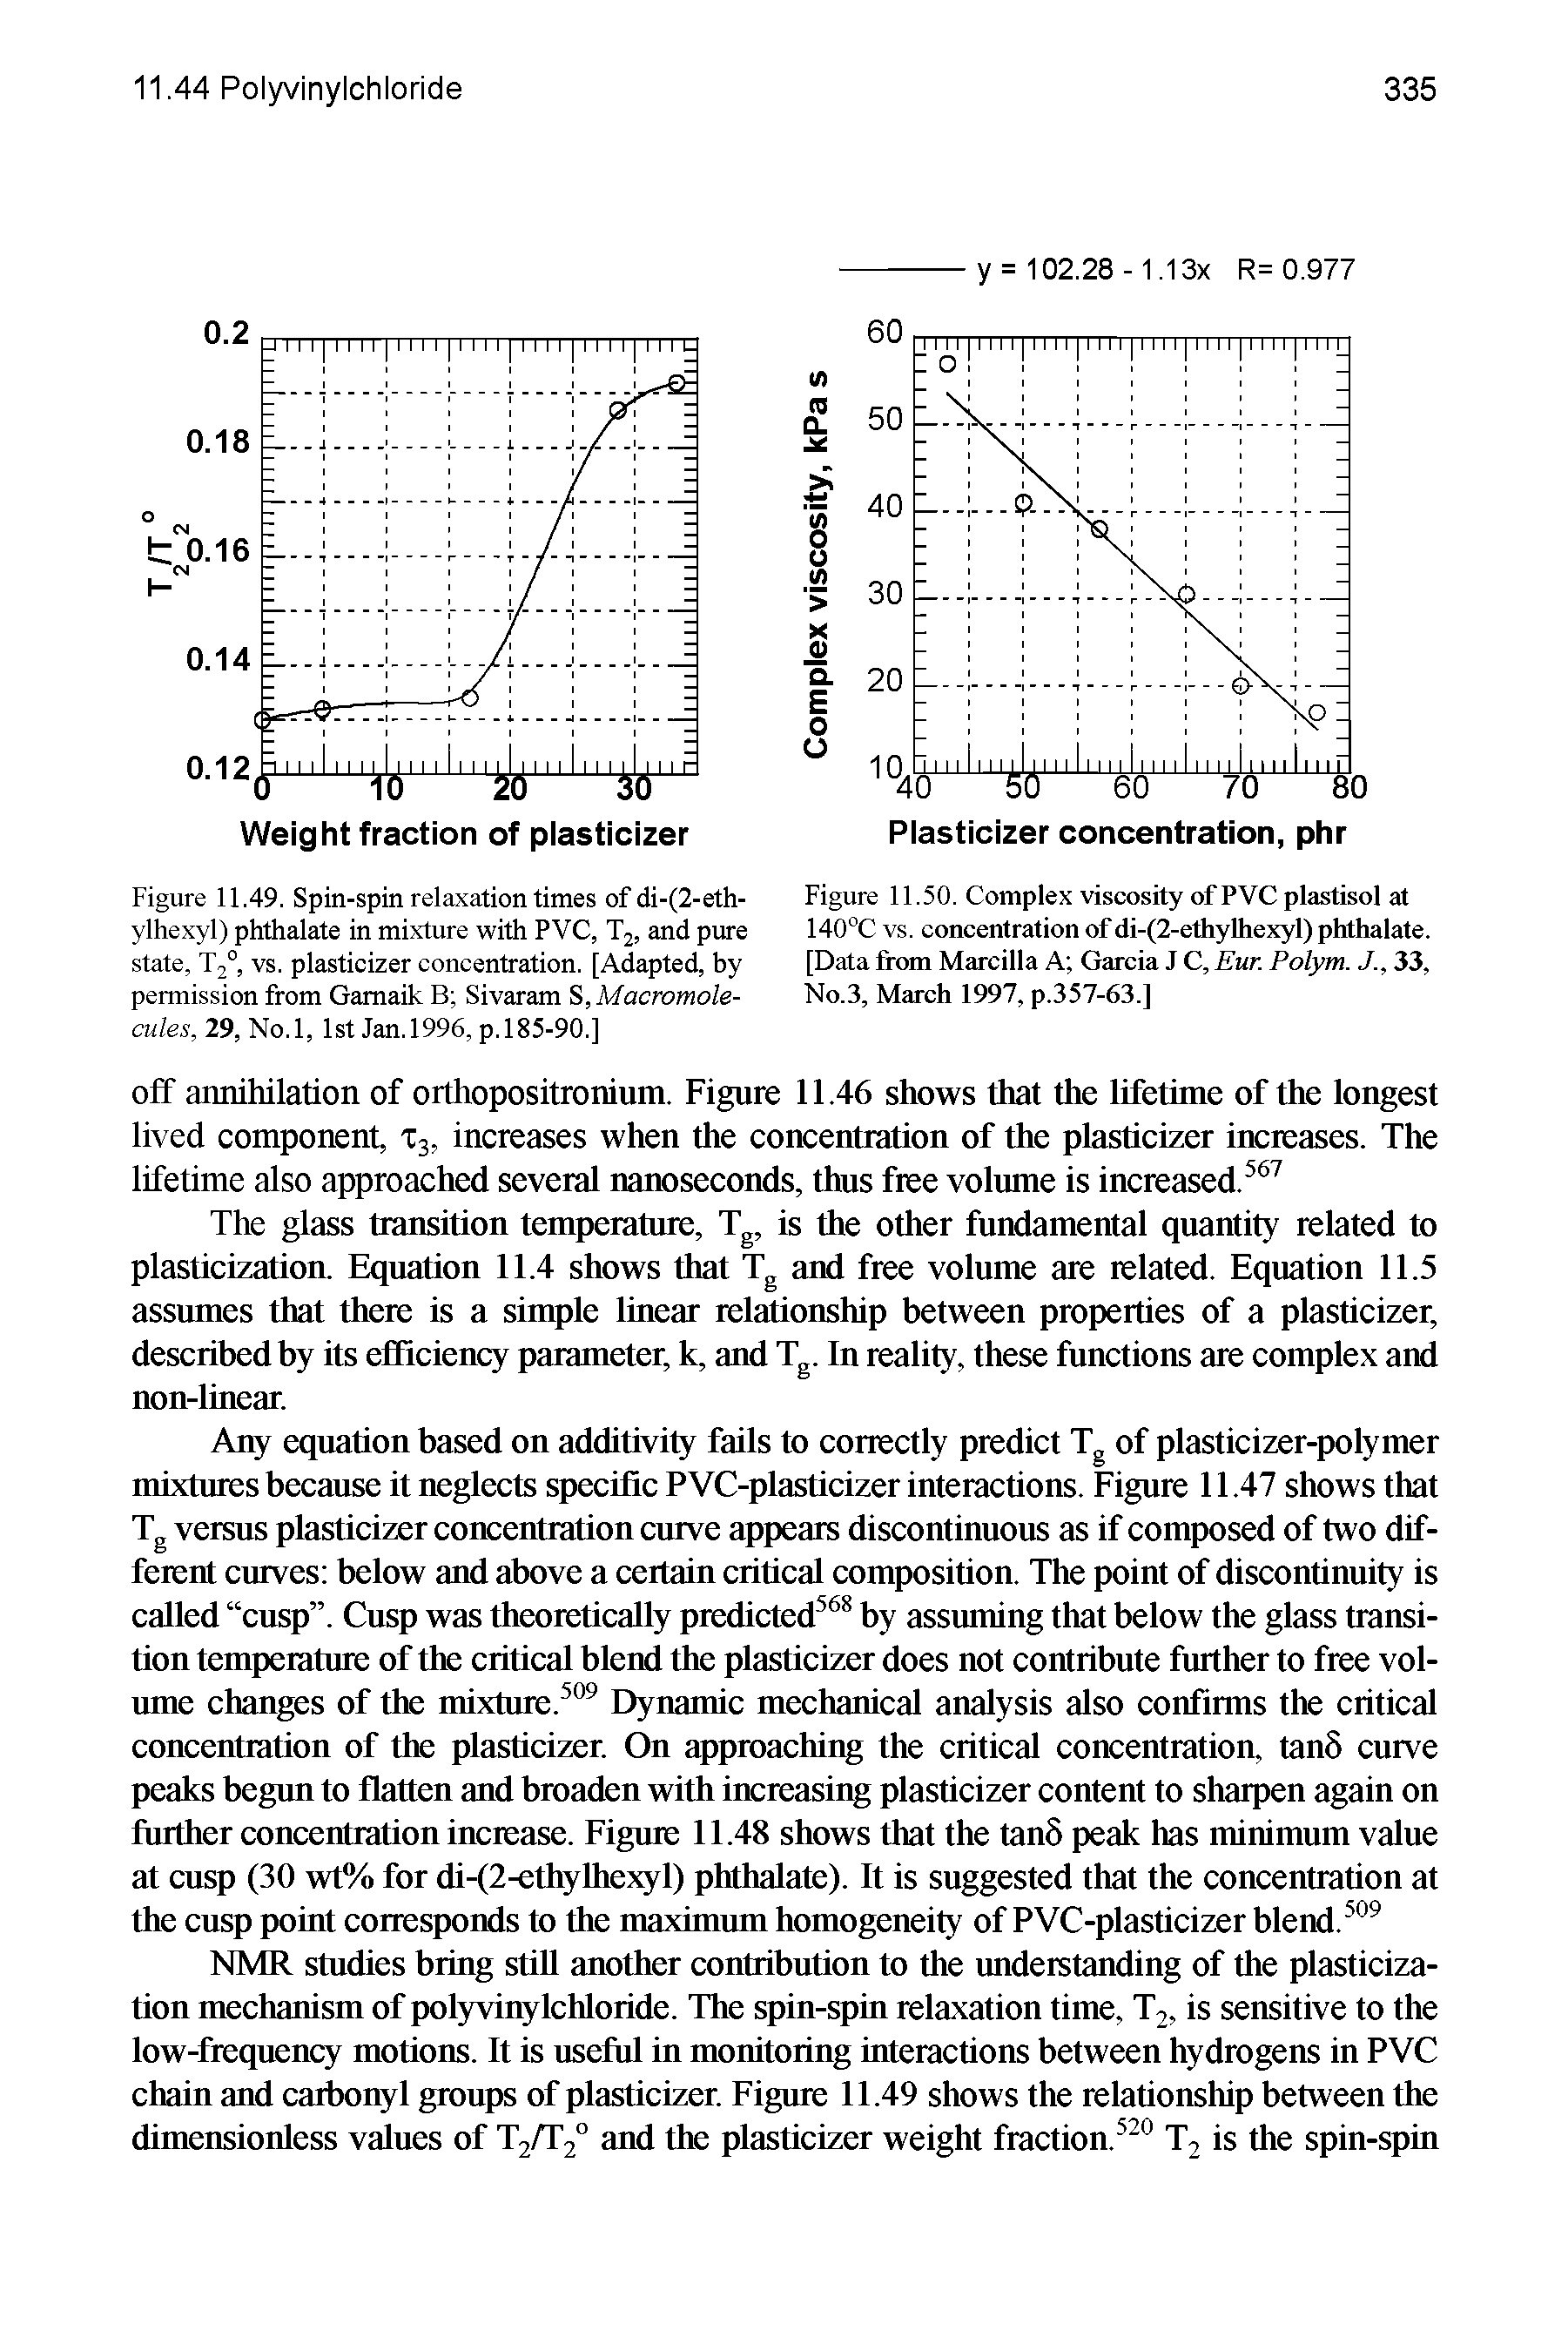 Figure 11.50. Complex viscosity of PVC plastisol at 140°C vs. concentration of di-(2-ethylhexyl) phthalate. [Data from Marcilla A Garcia J C, Eur. Polym. J., 33, No.3, March 1997, p.357-63.]...